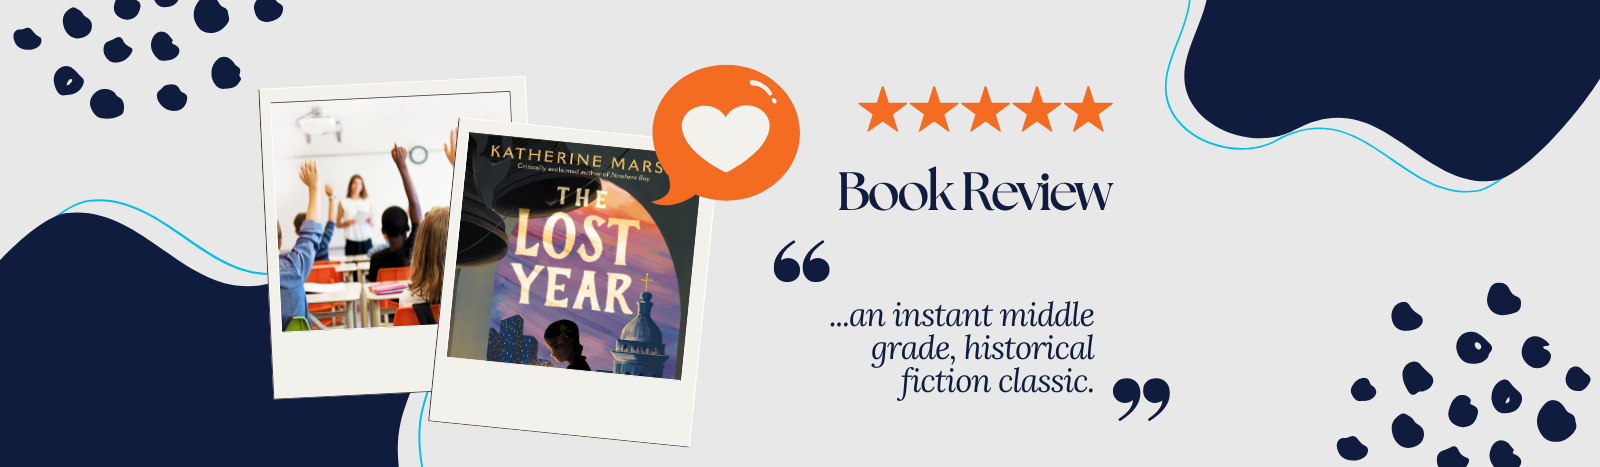 The Lost Year by Katherine Marsh – Book Review